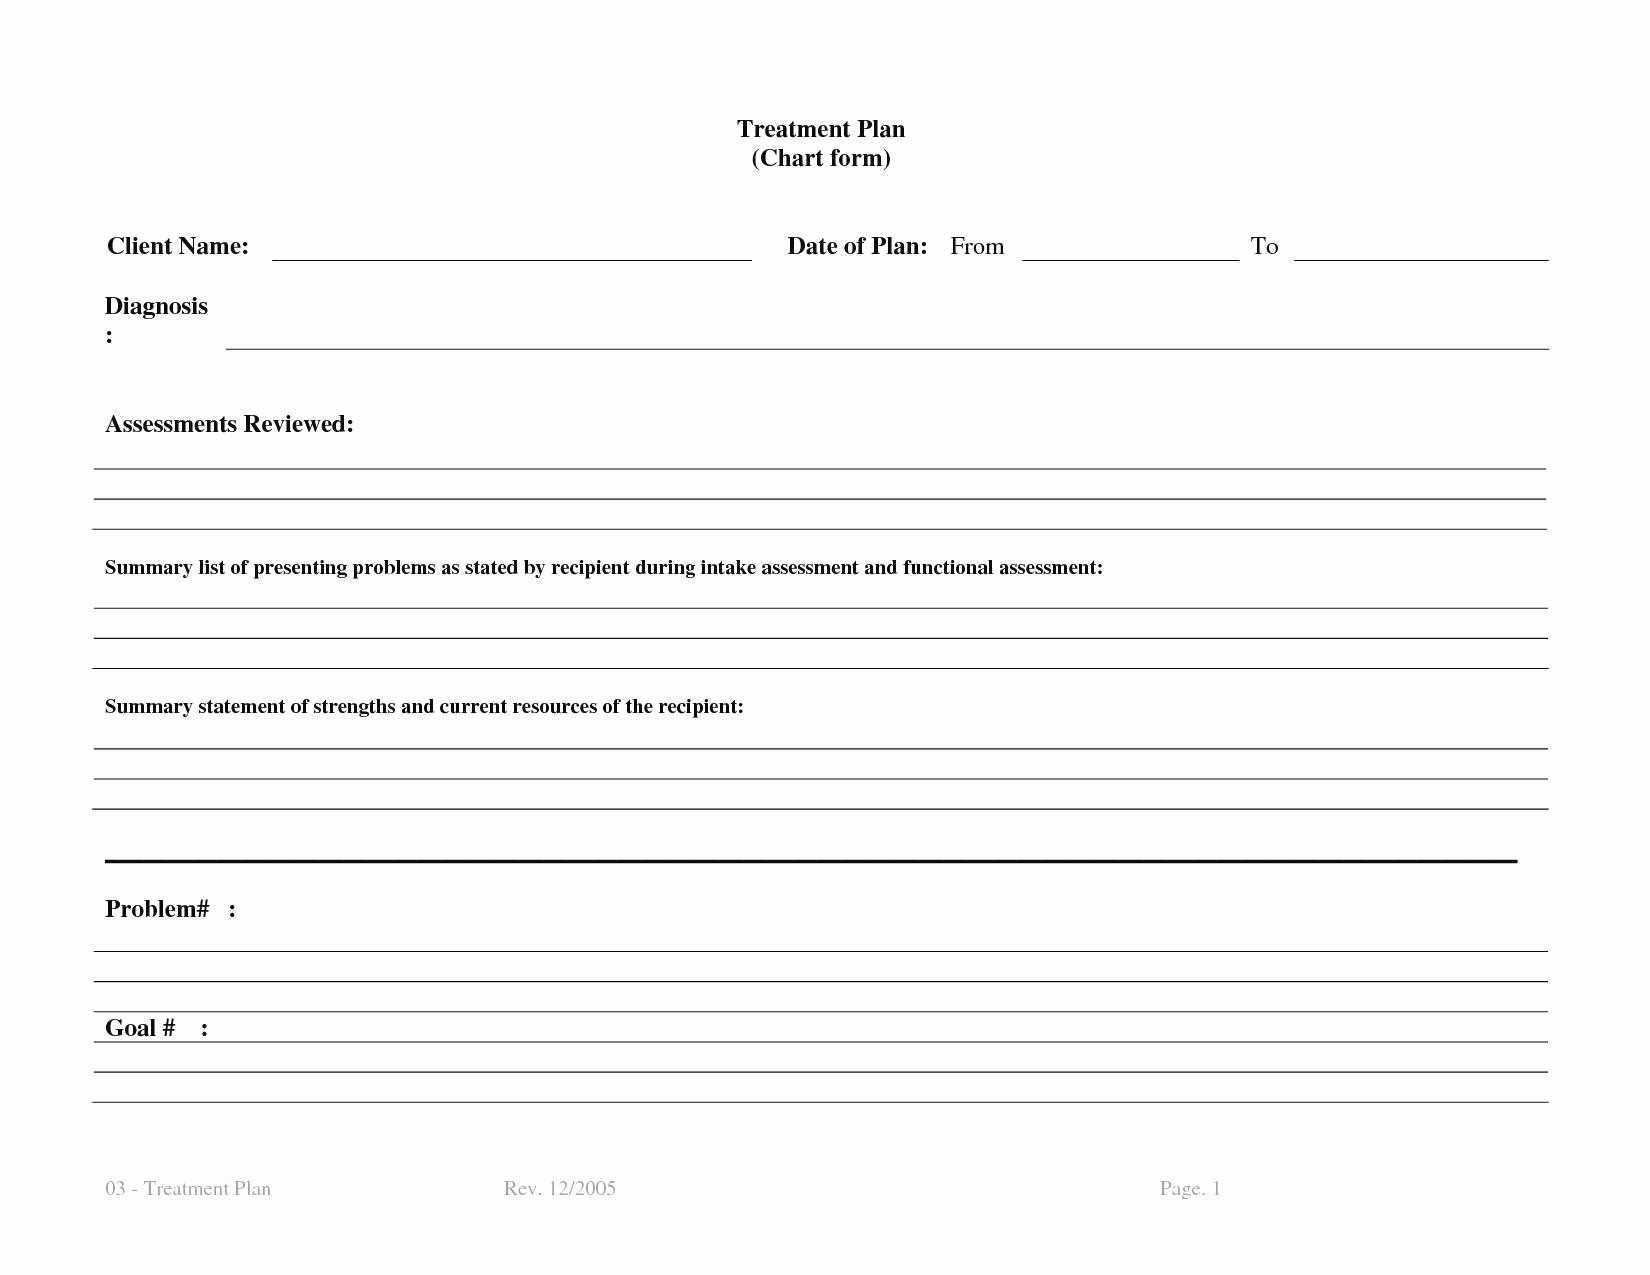 Treatment Plan Template for Counseling New Elegant Counseling Treatment Plan Template